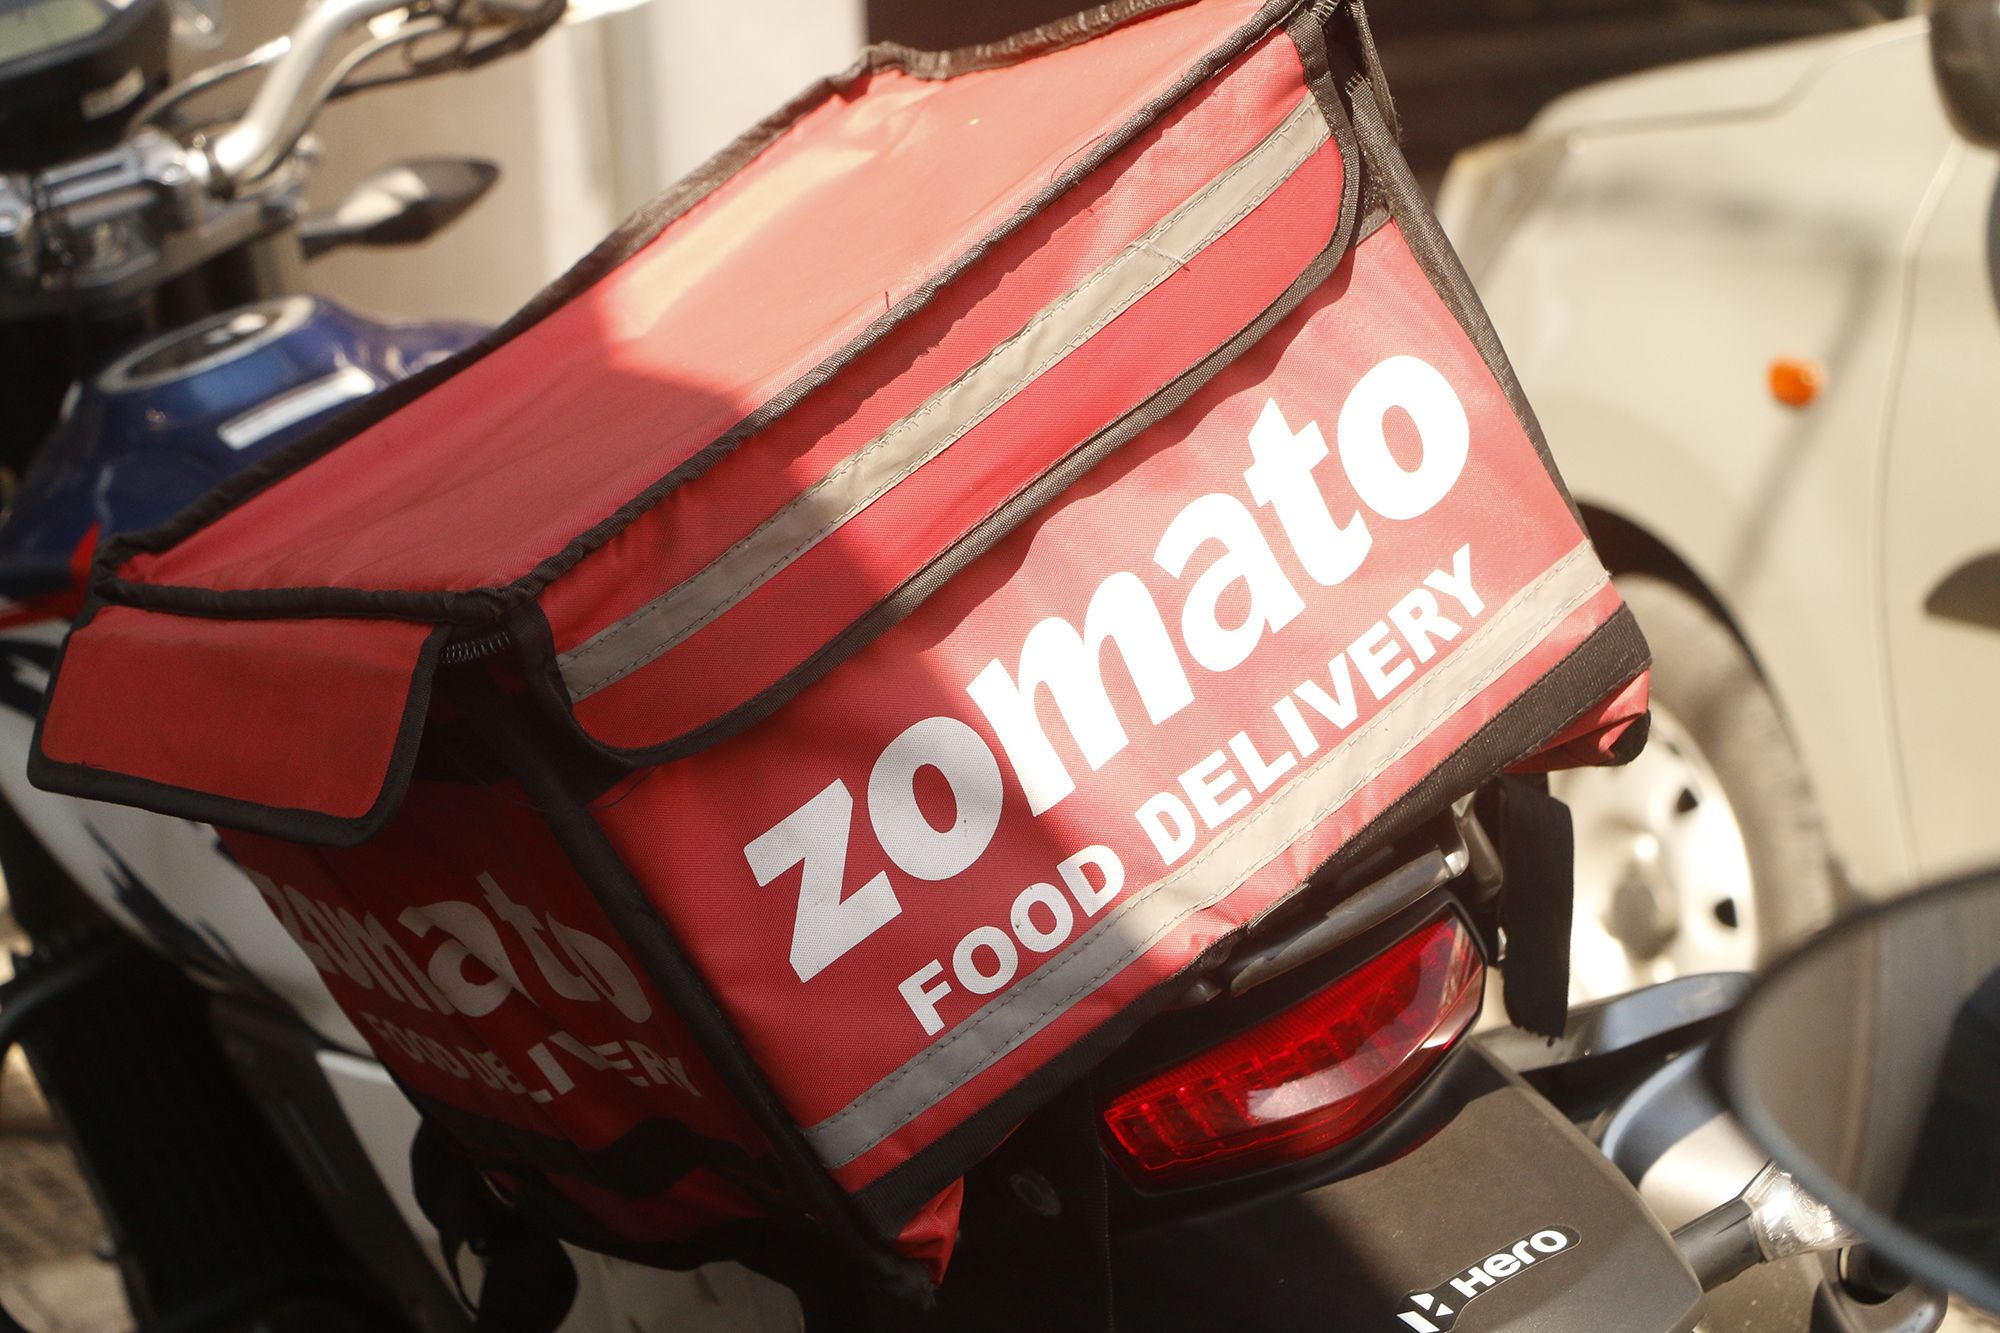 Zomato lays off 60 employees as it scales up technology